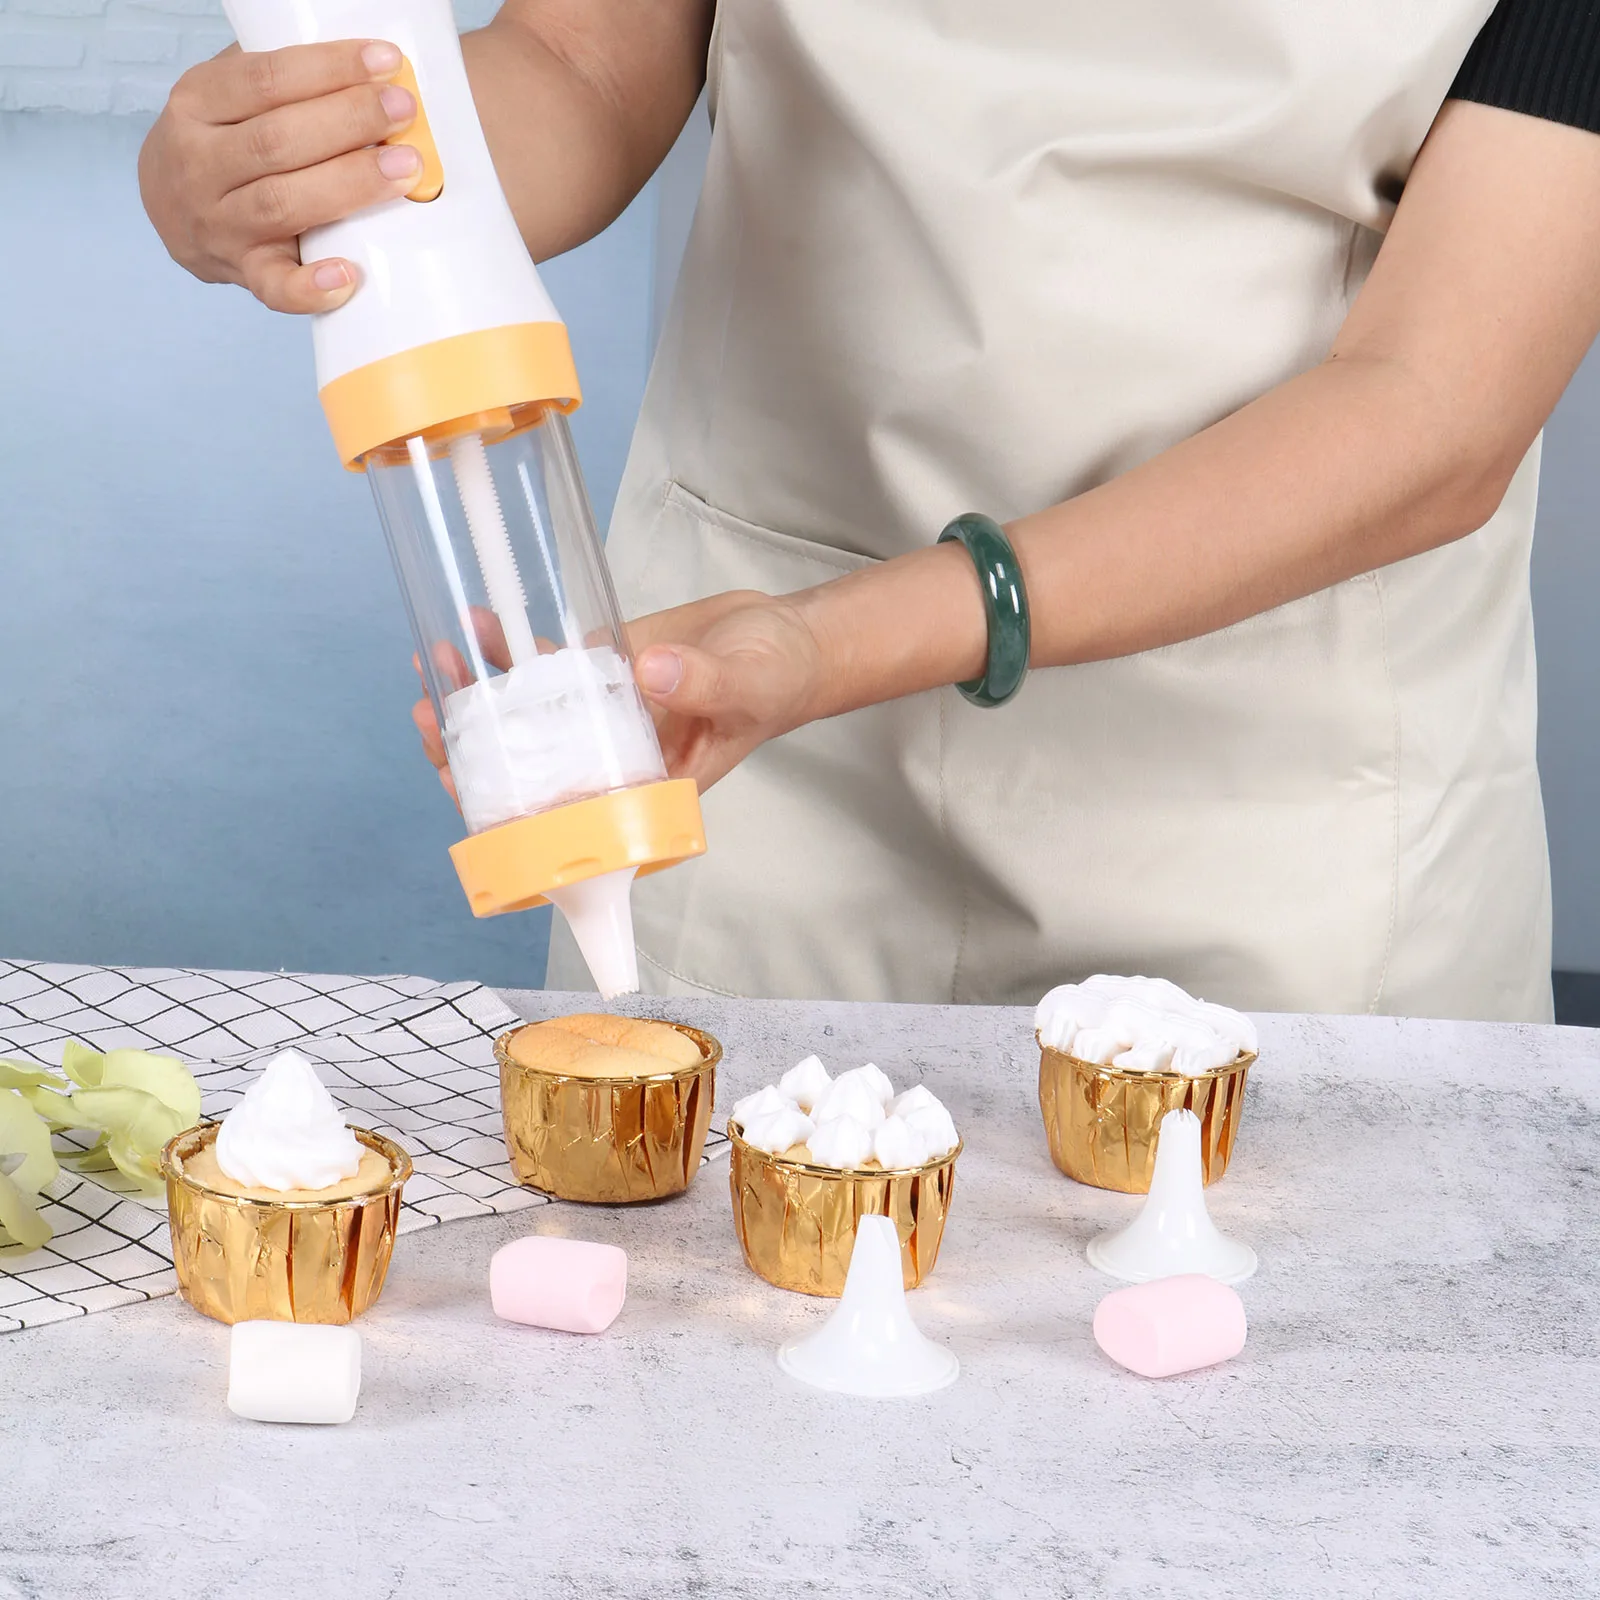 

Cookie Press Maker Biscuit Gun Icing Decorating Gun Sets Stainless Steel Disc Shapes Cookie Kits Dessert Cake Decoration Tools